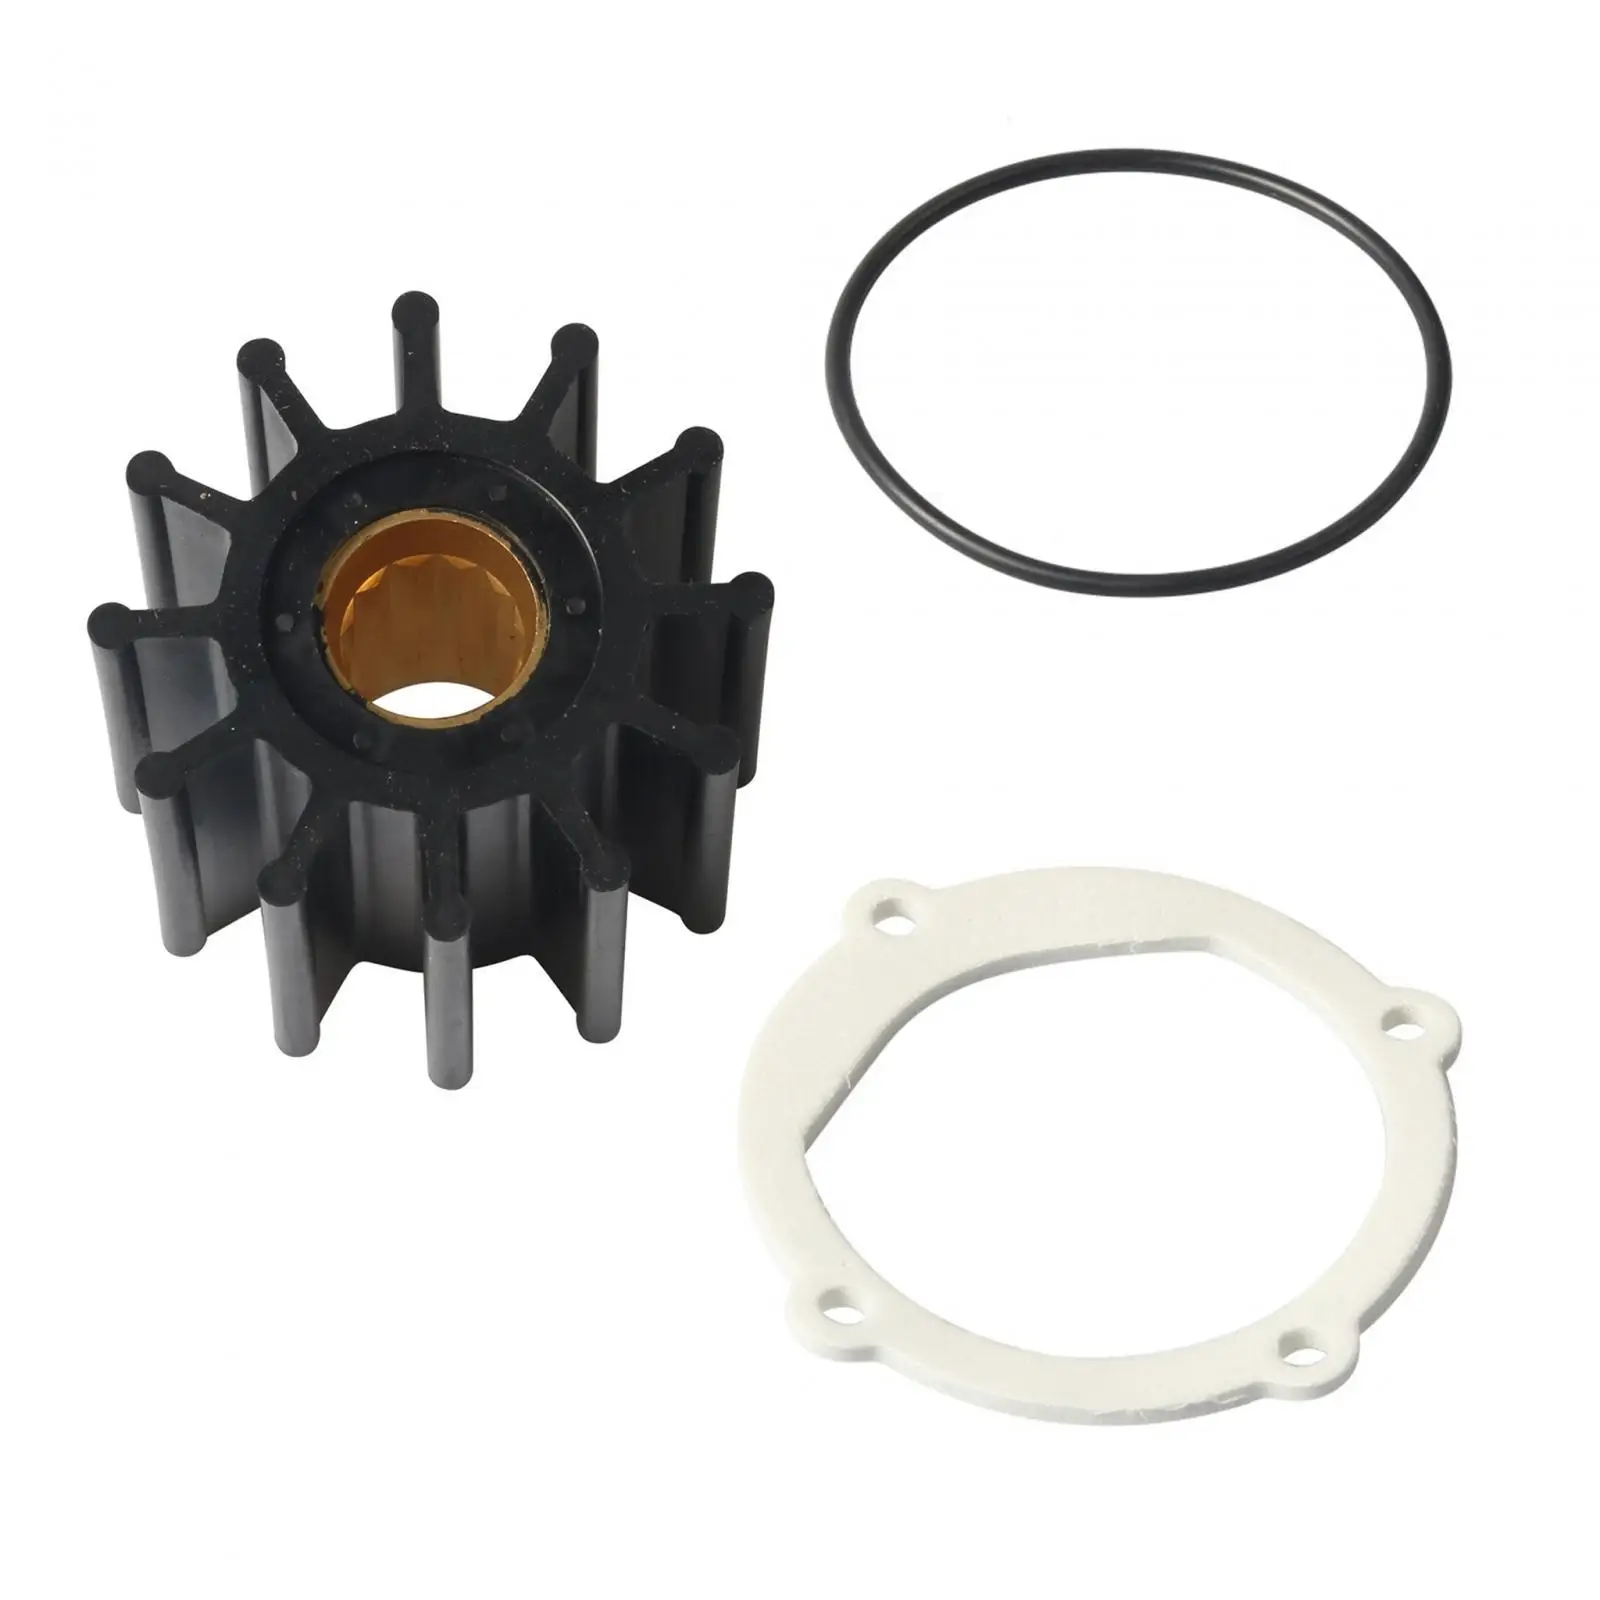 Water Pump Impeller Repair Kits 102480501 Replacement Parts Professional Marine Propeller Parts Sturdy Easily Install Accessory